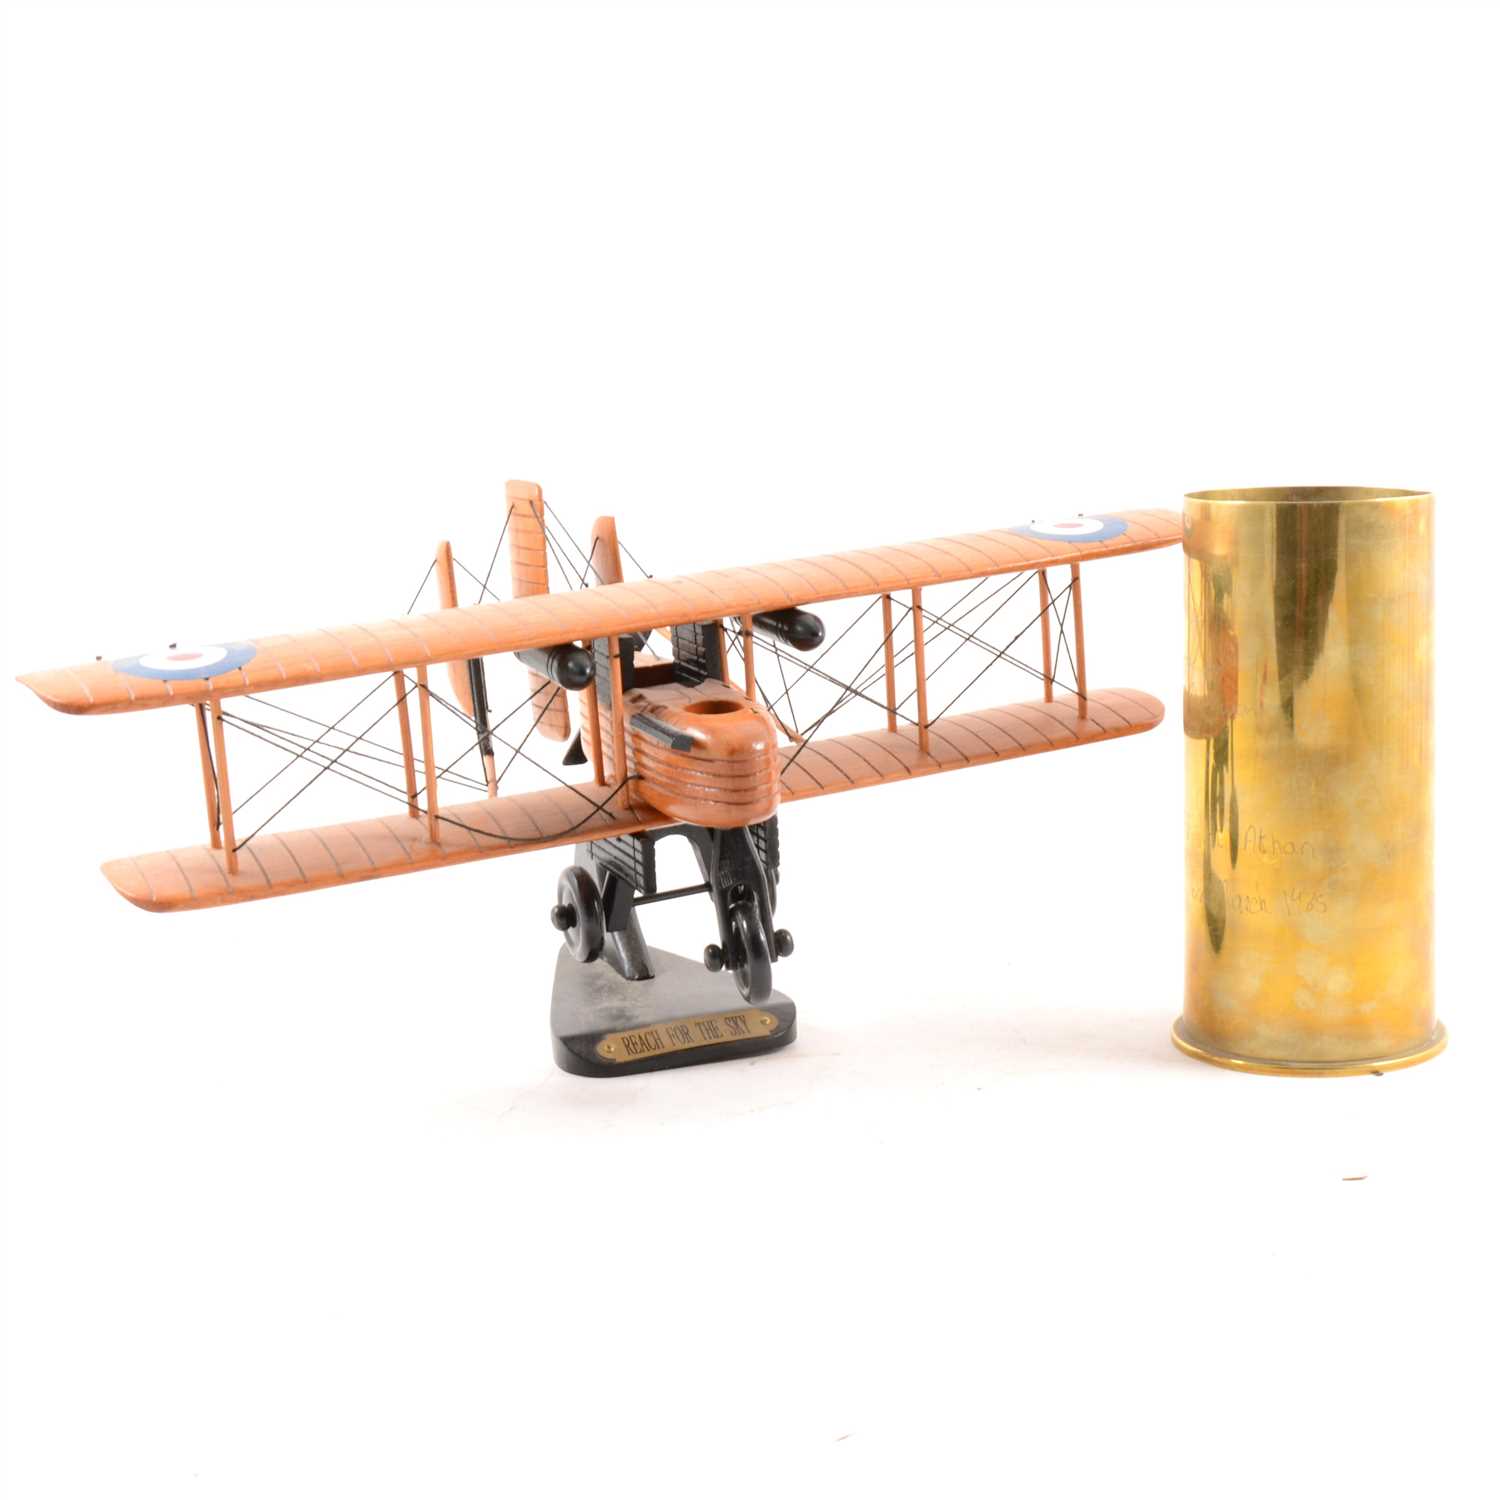 Lot 97 - Brass aircraft engine starter cartridge No. 10 Mk.3 RLB83/7, pair of RAF napkin rings, wooden model bi-plane "Reach For The Sky", sword in scabbard.